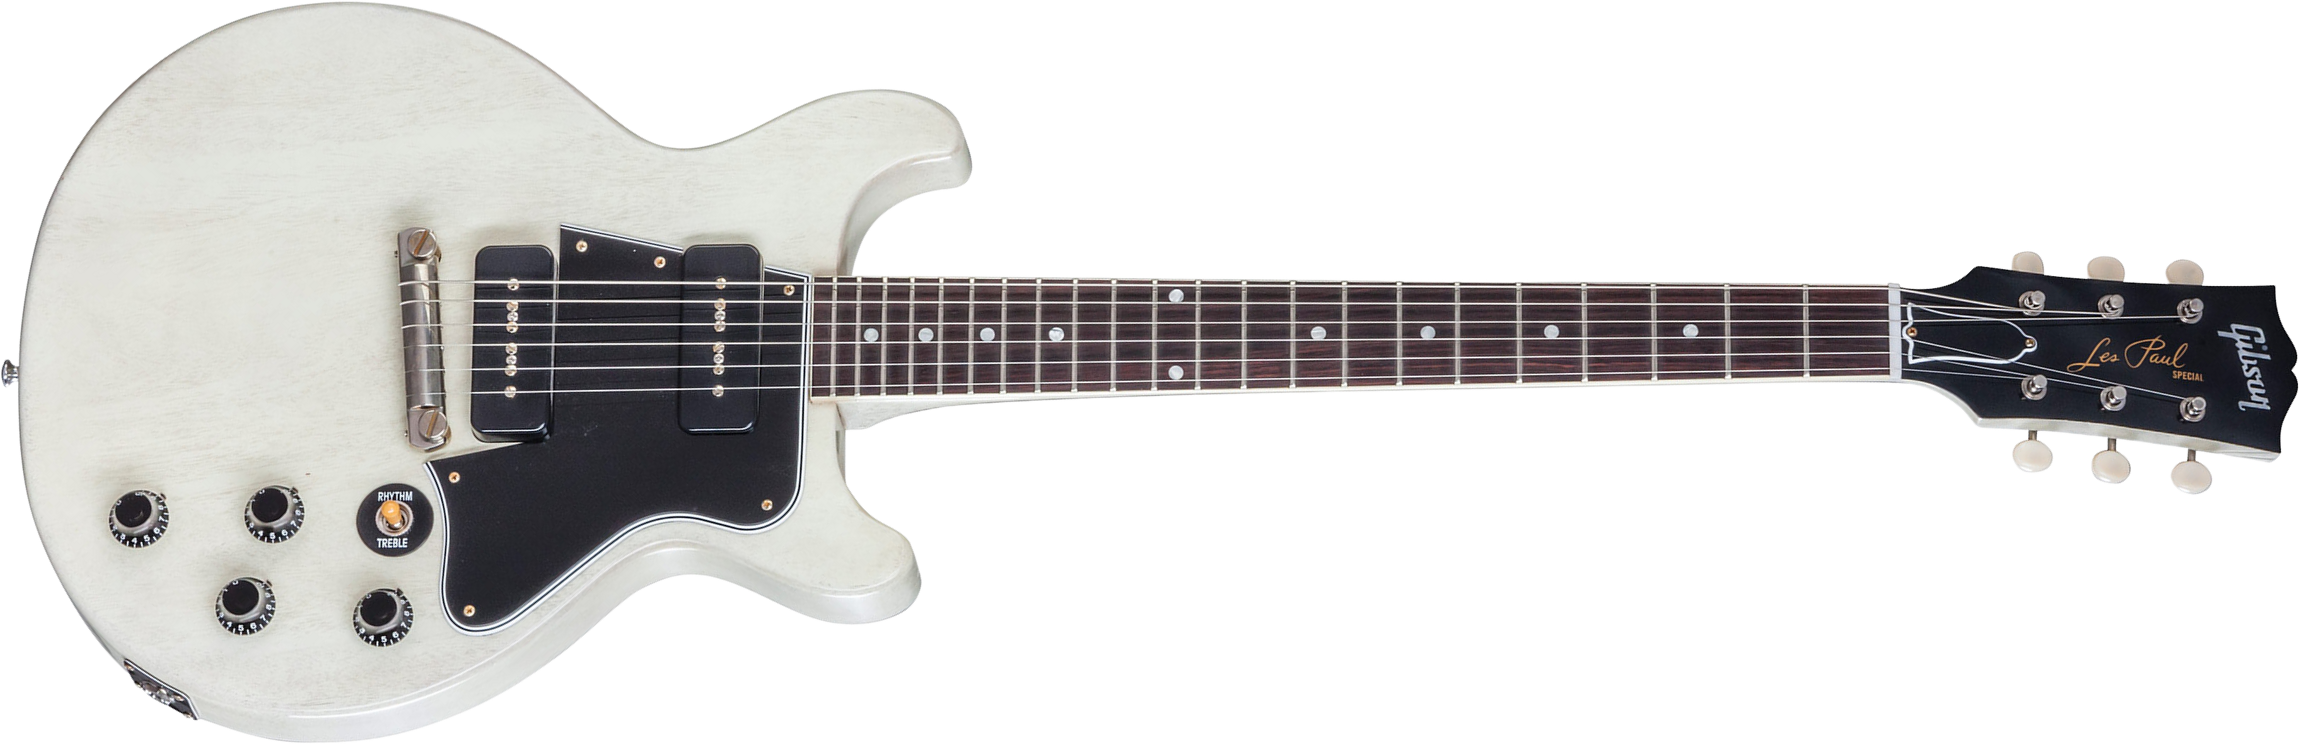 Gibson Custom Shop Les Paul Special Double Cut Nh 2017 - Tv White - Double cut electric guitar - Main picture